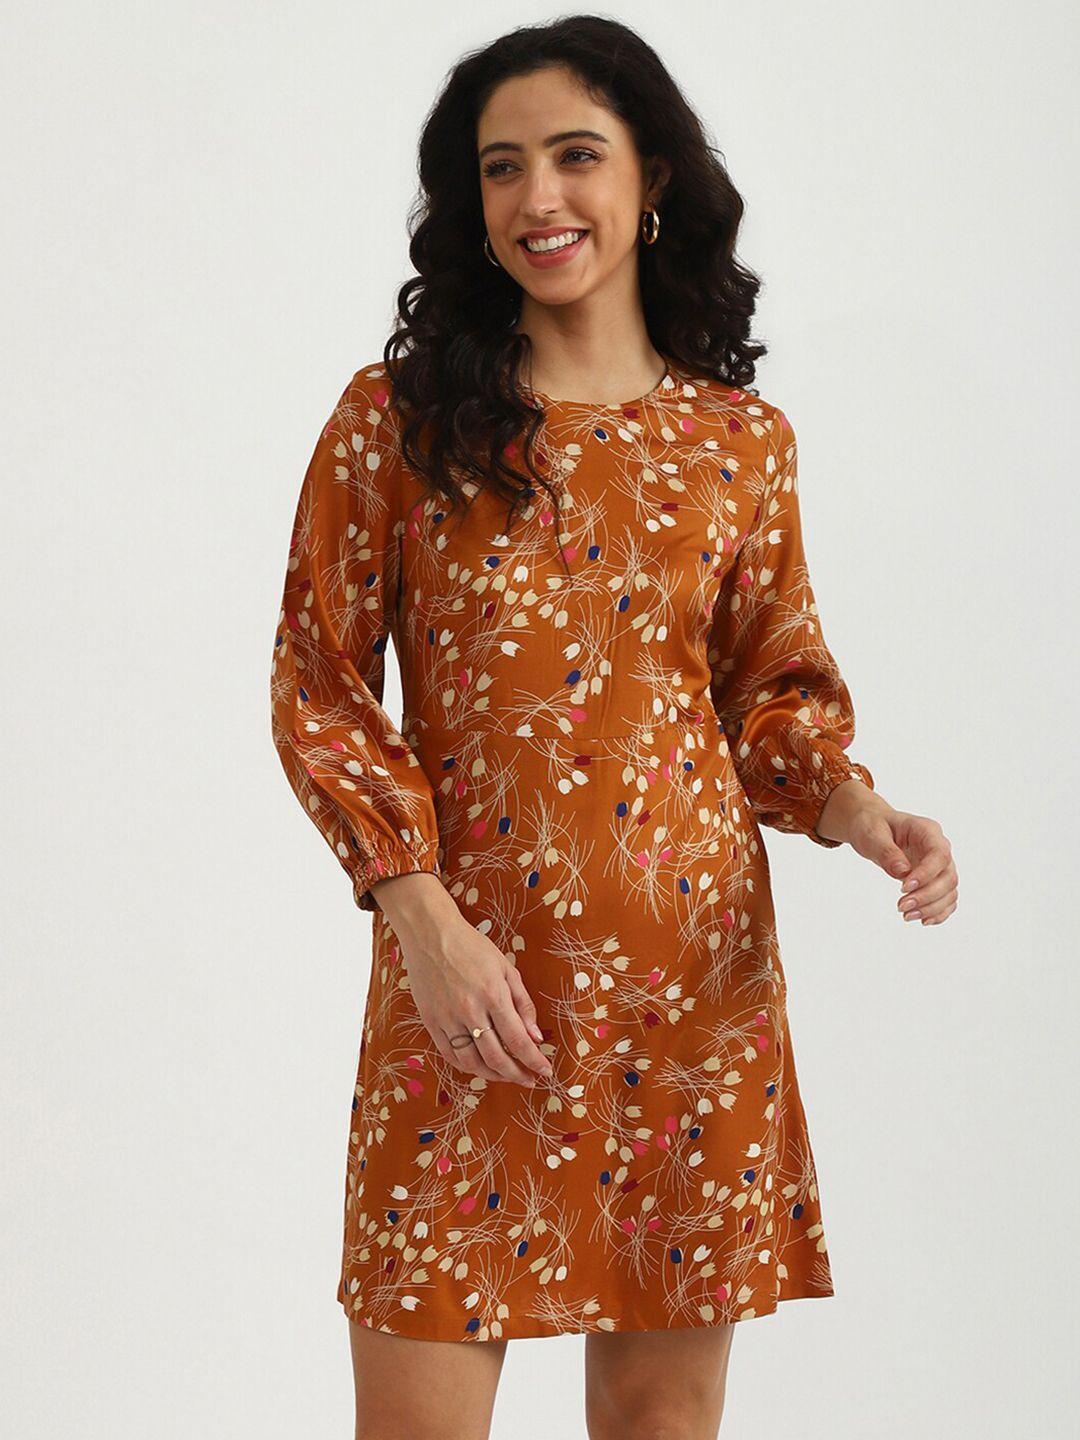 united colors of benetton brown floral printed a-line dress